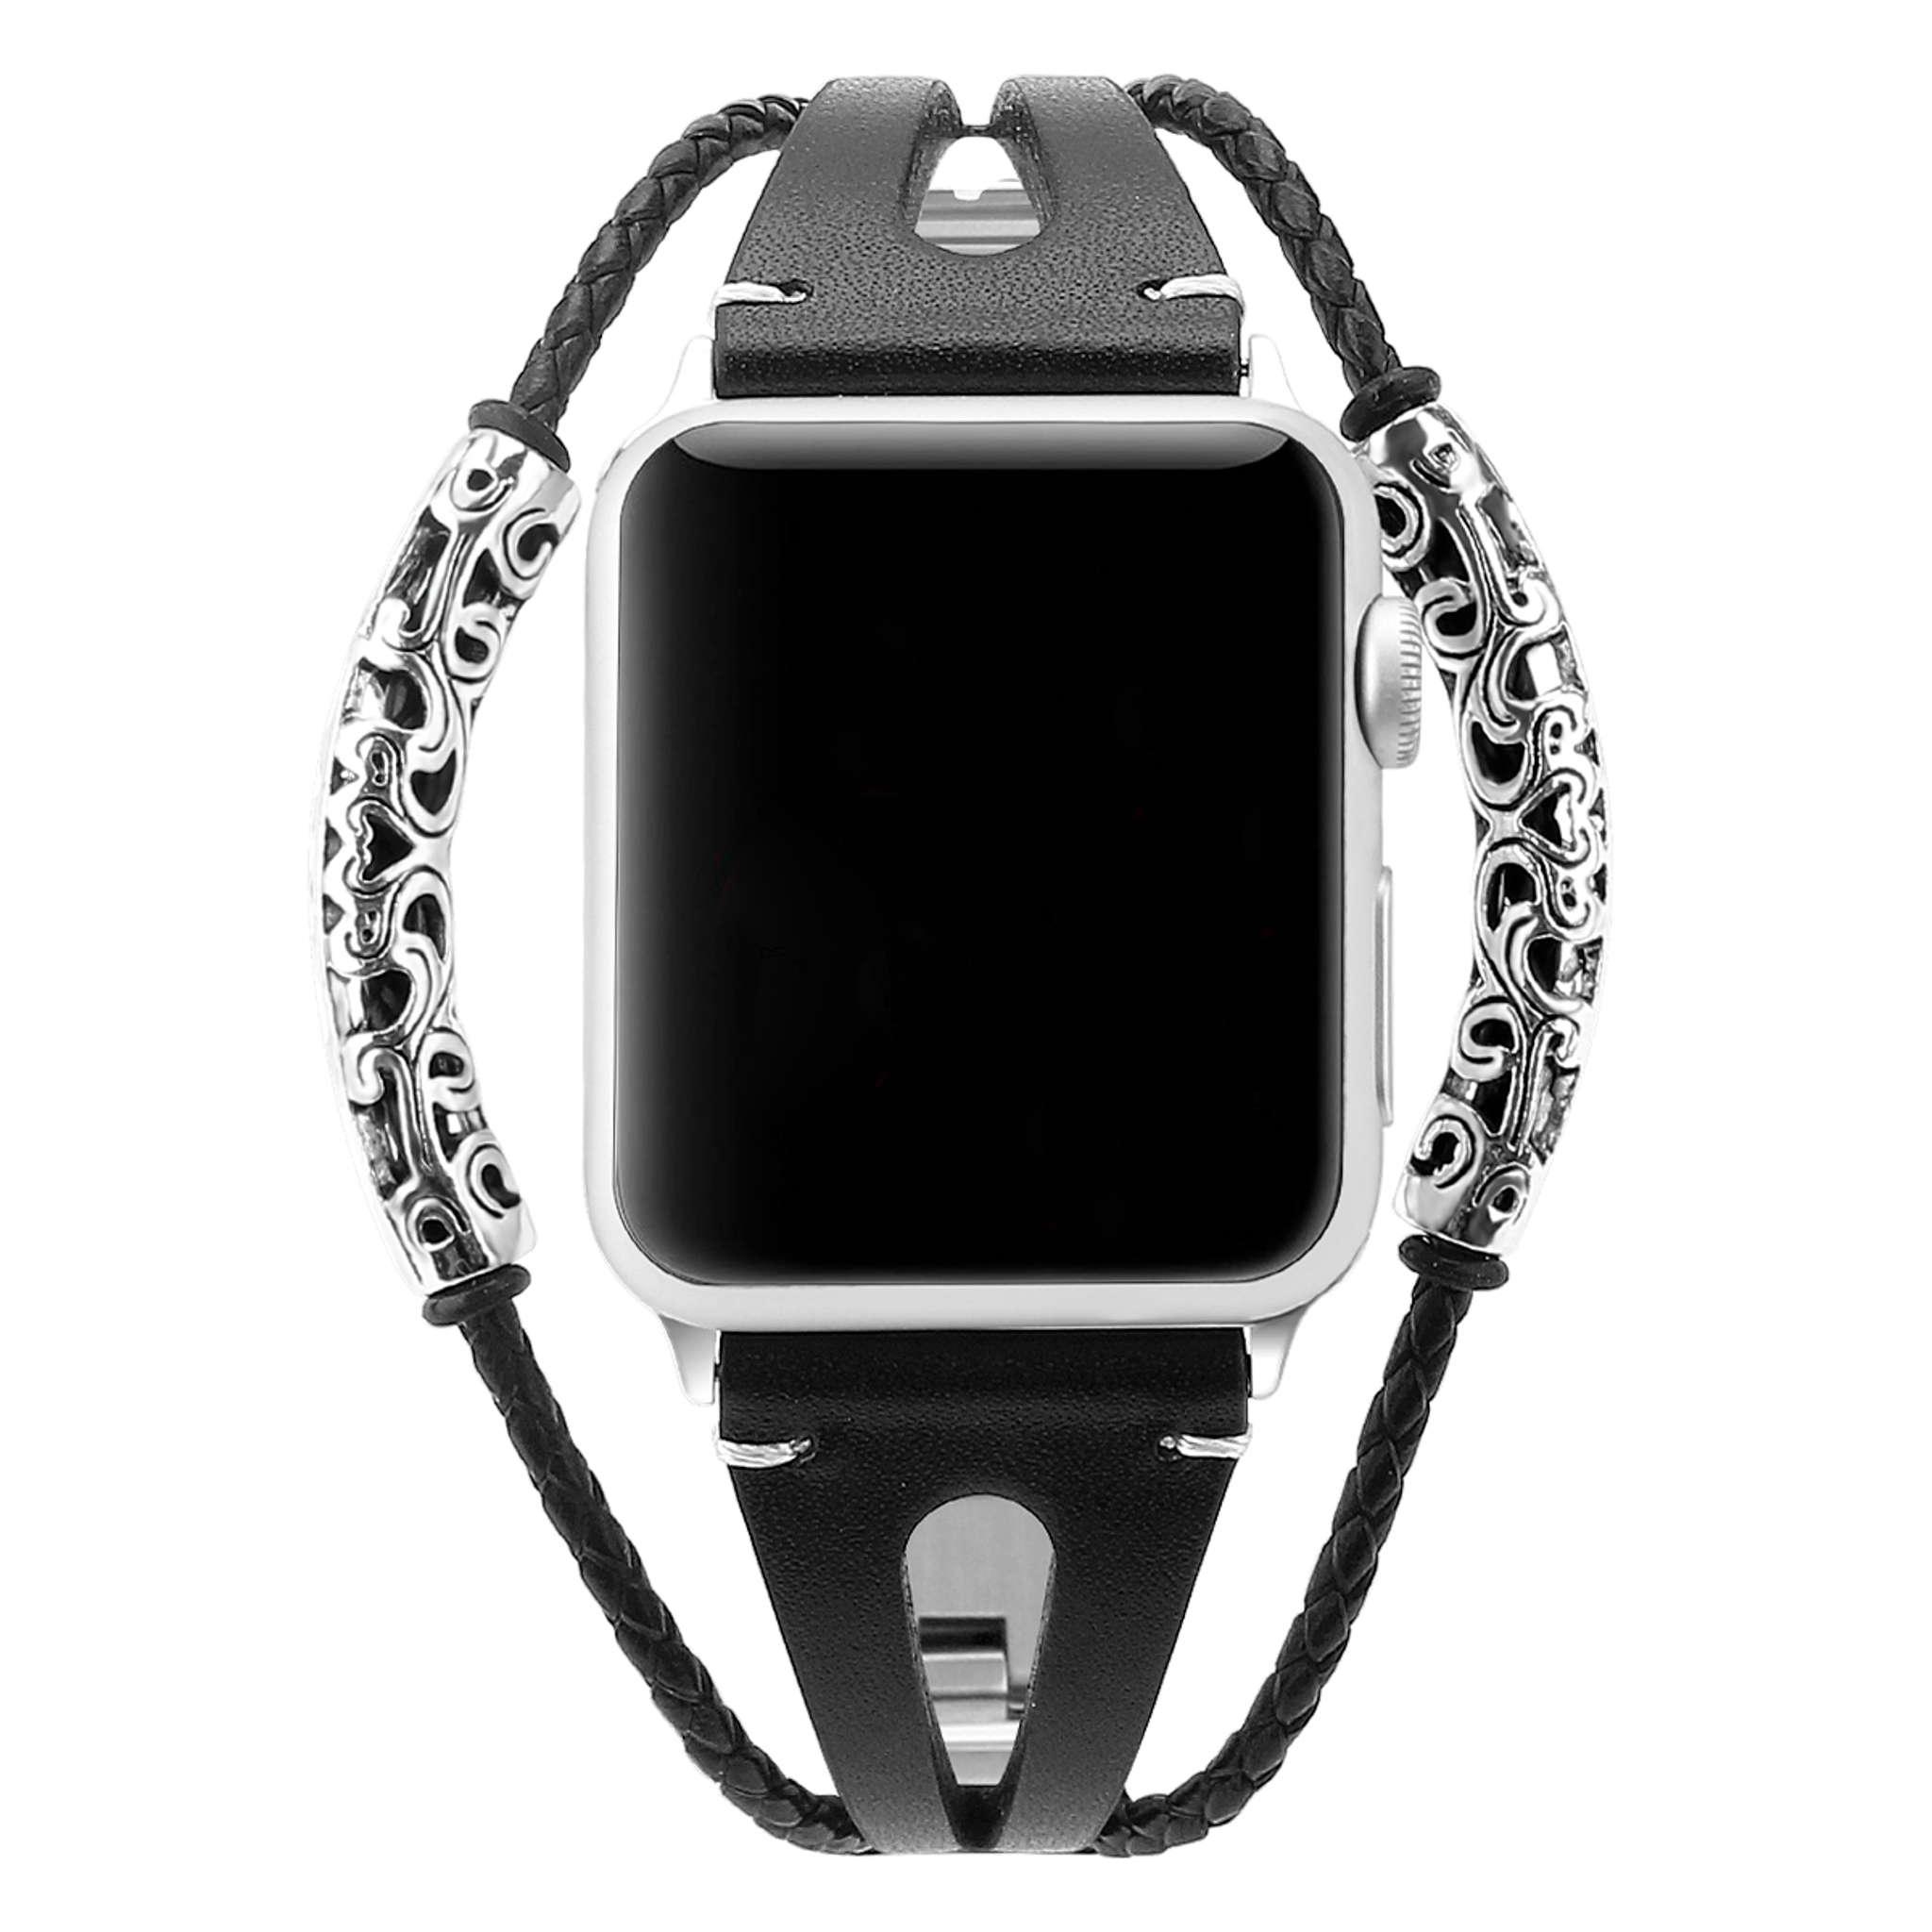 Apple Watch Leather Jewellery Robust Strap - Black